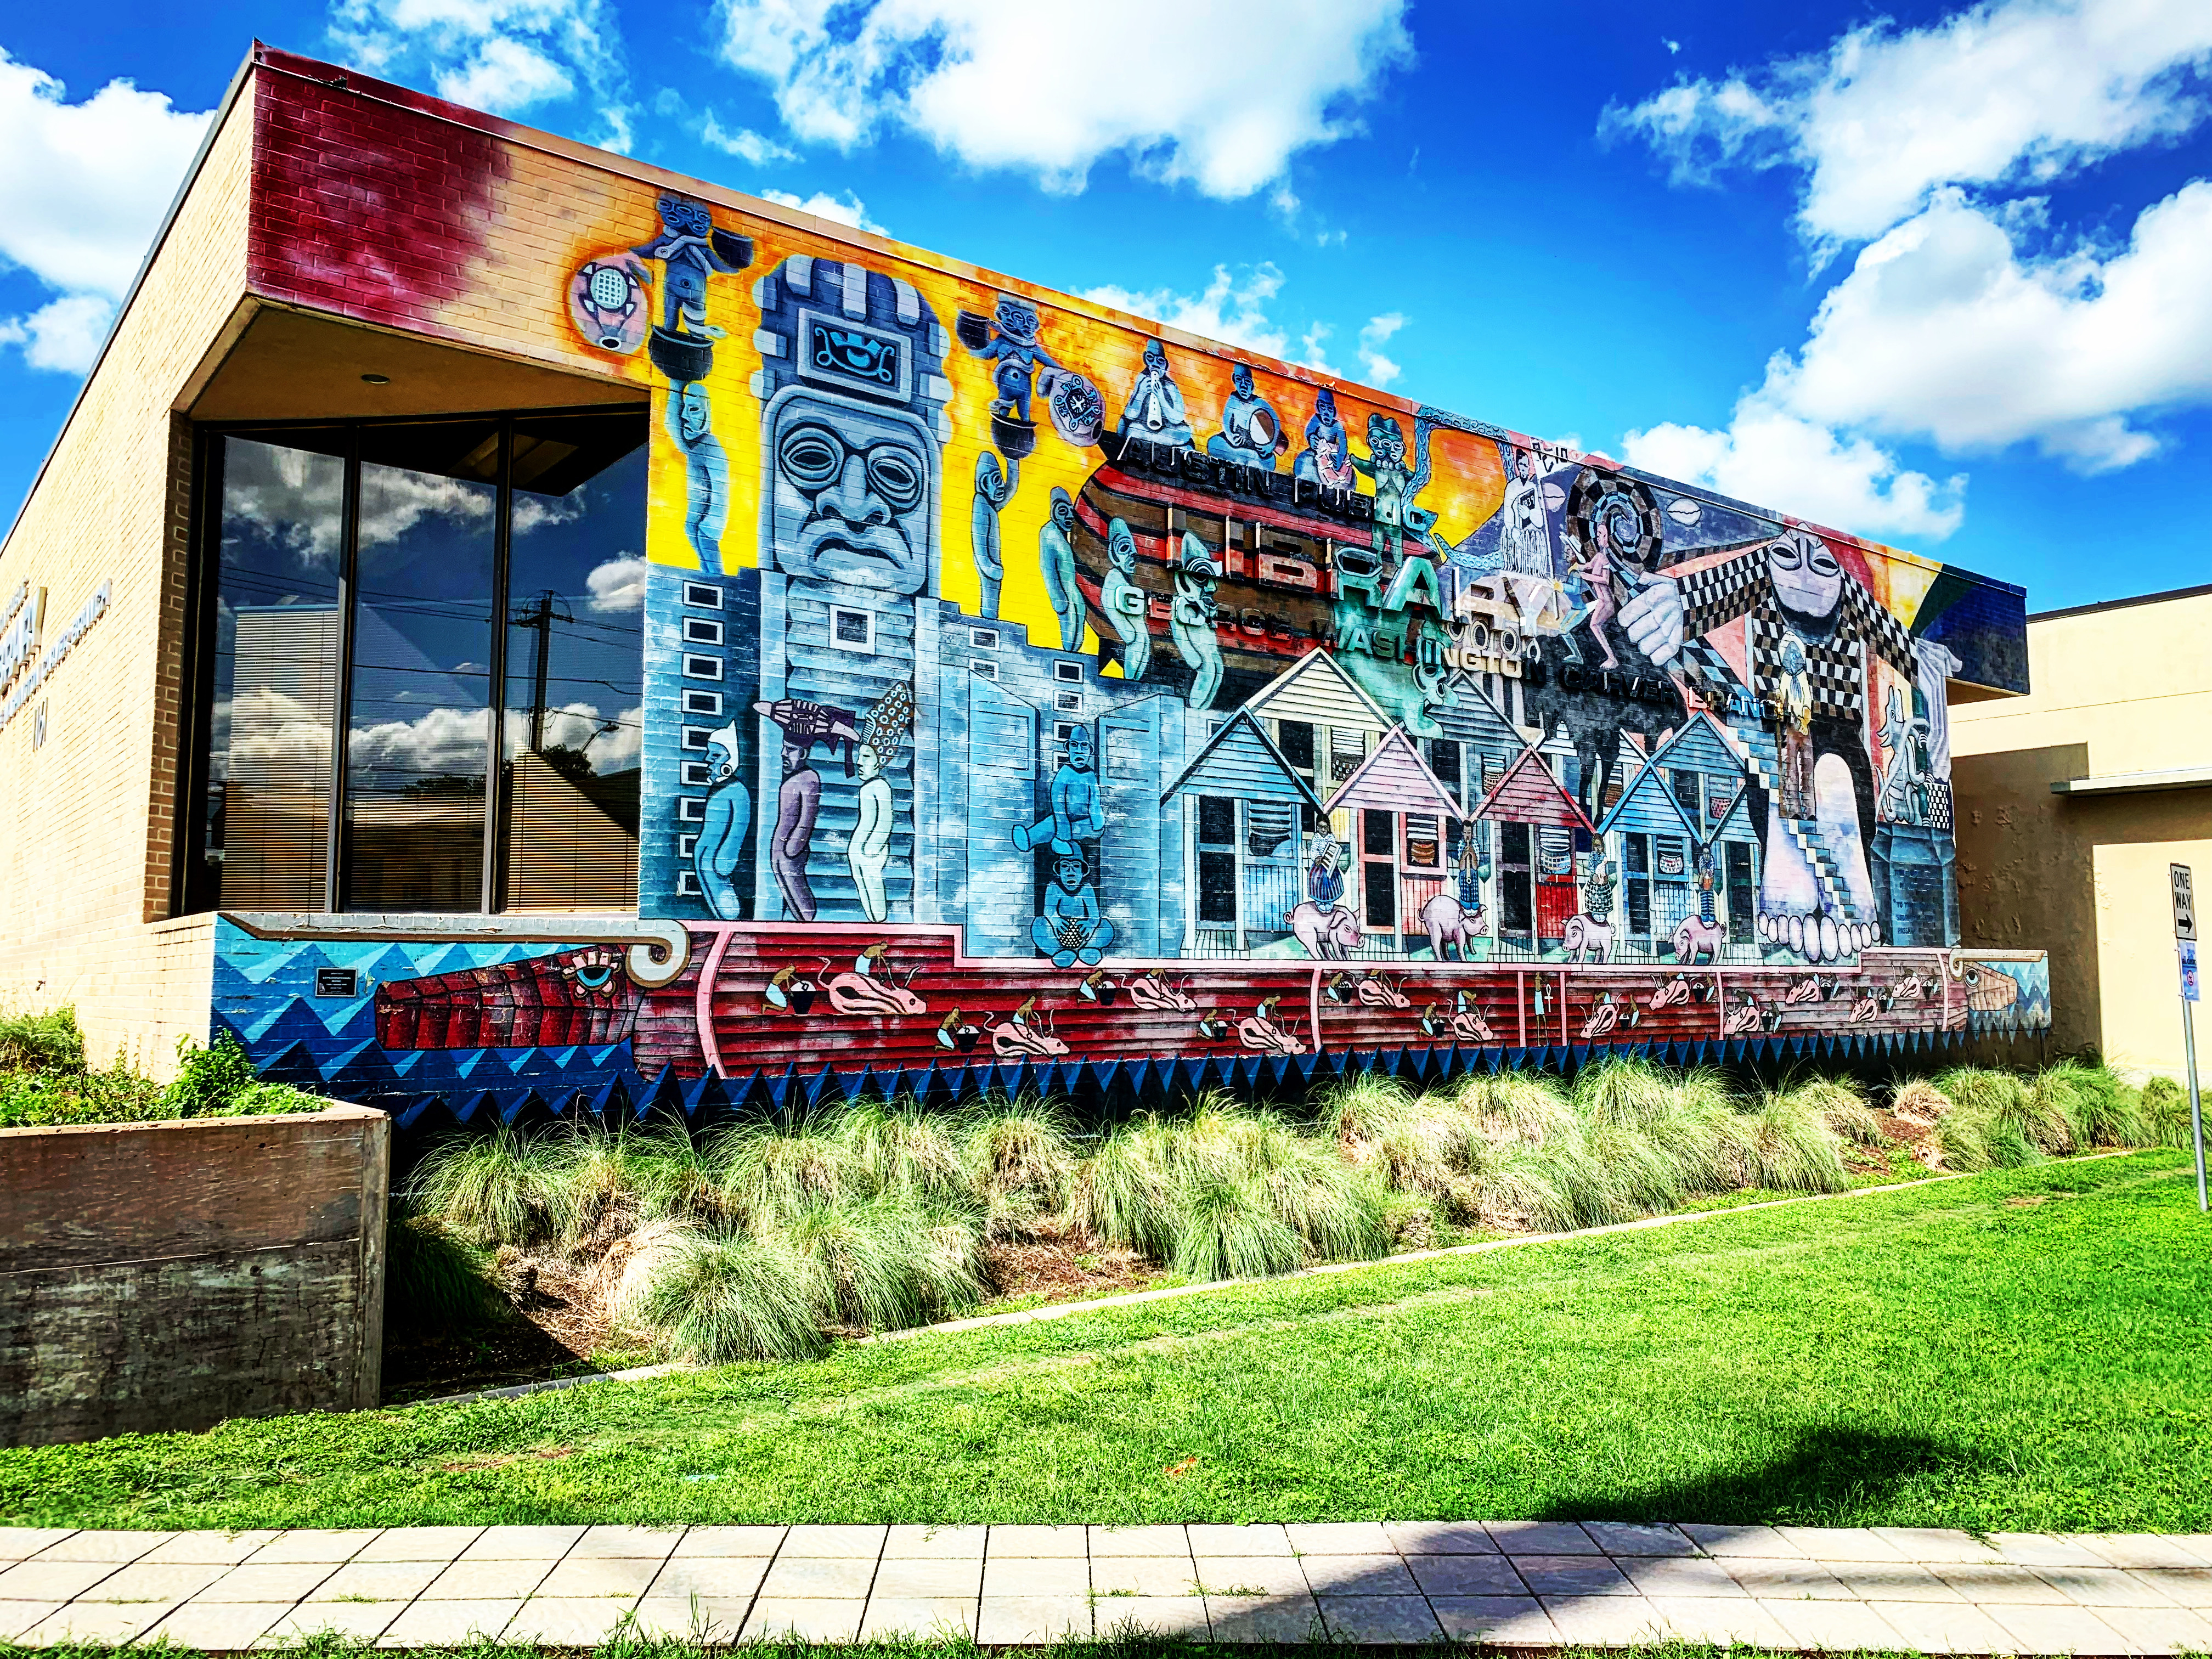 Soulsville Mural at the Carver Museum and Library in Austin Texas